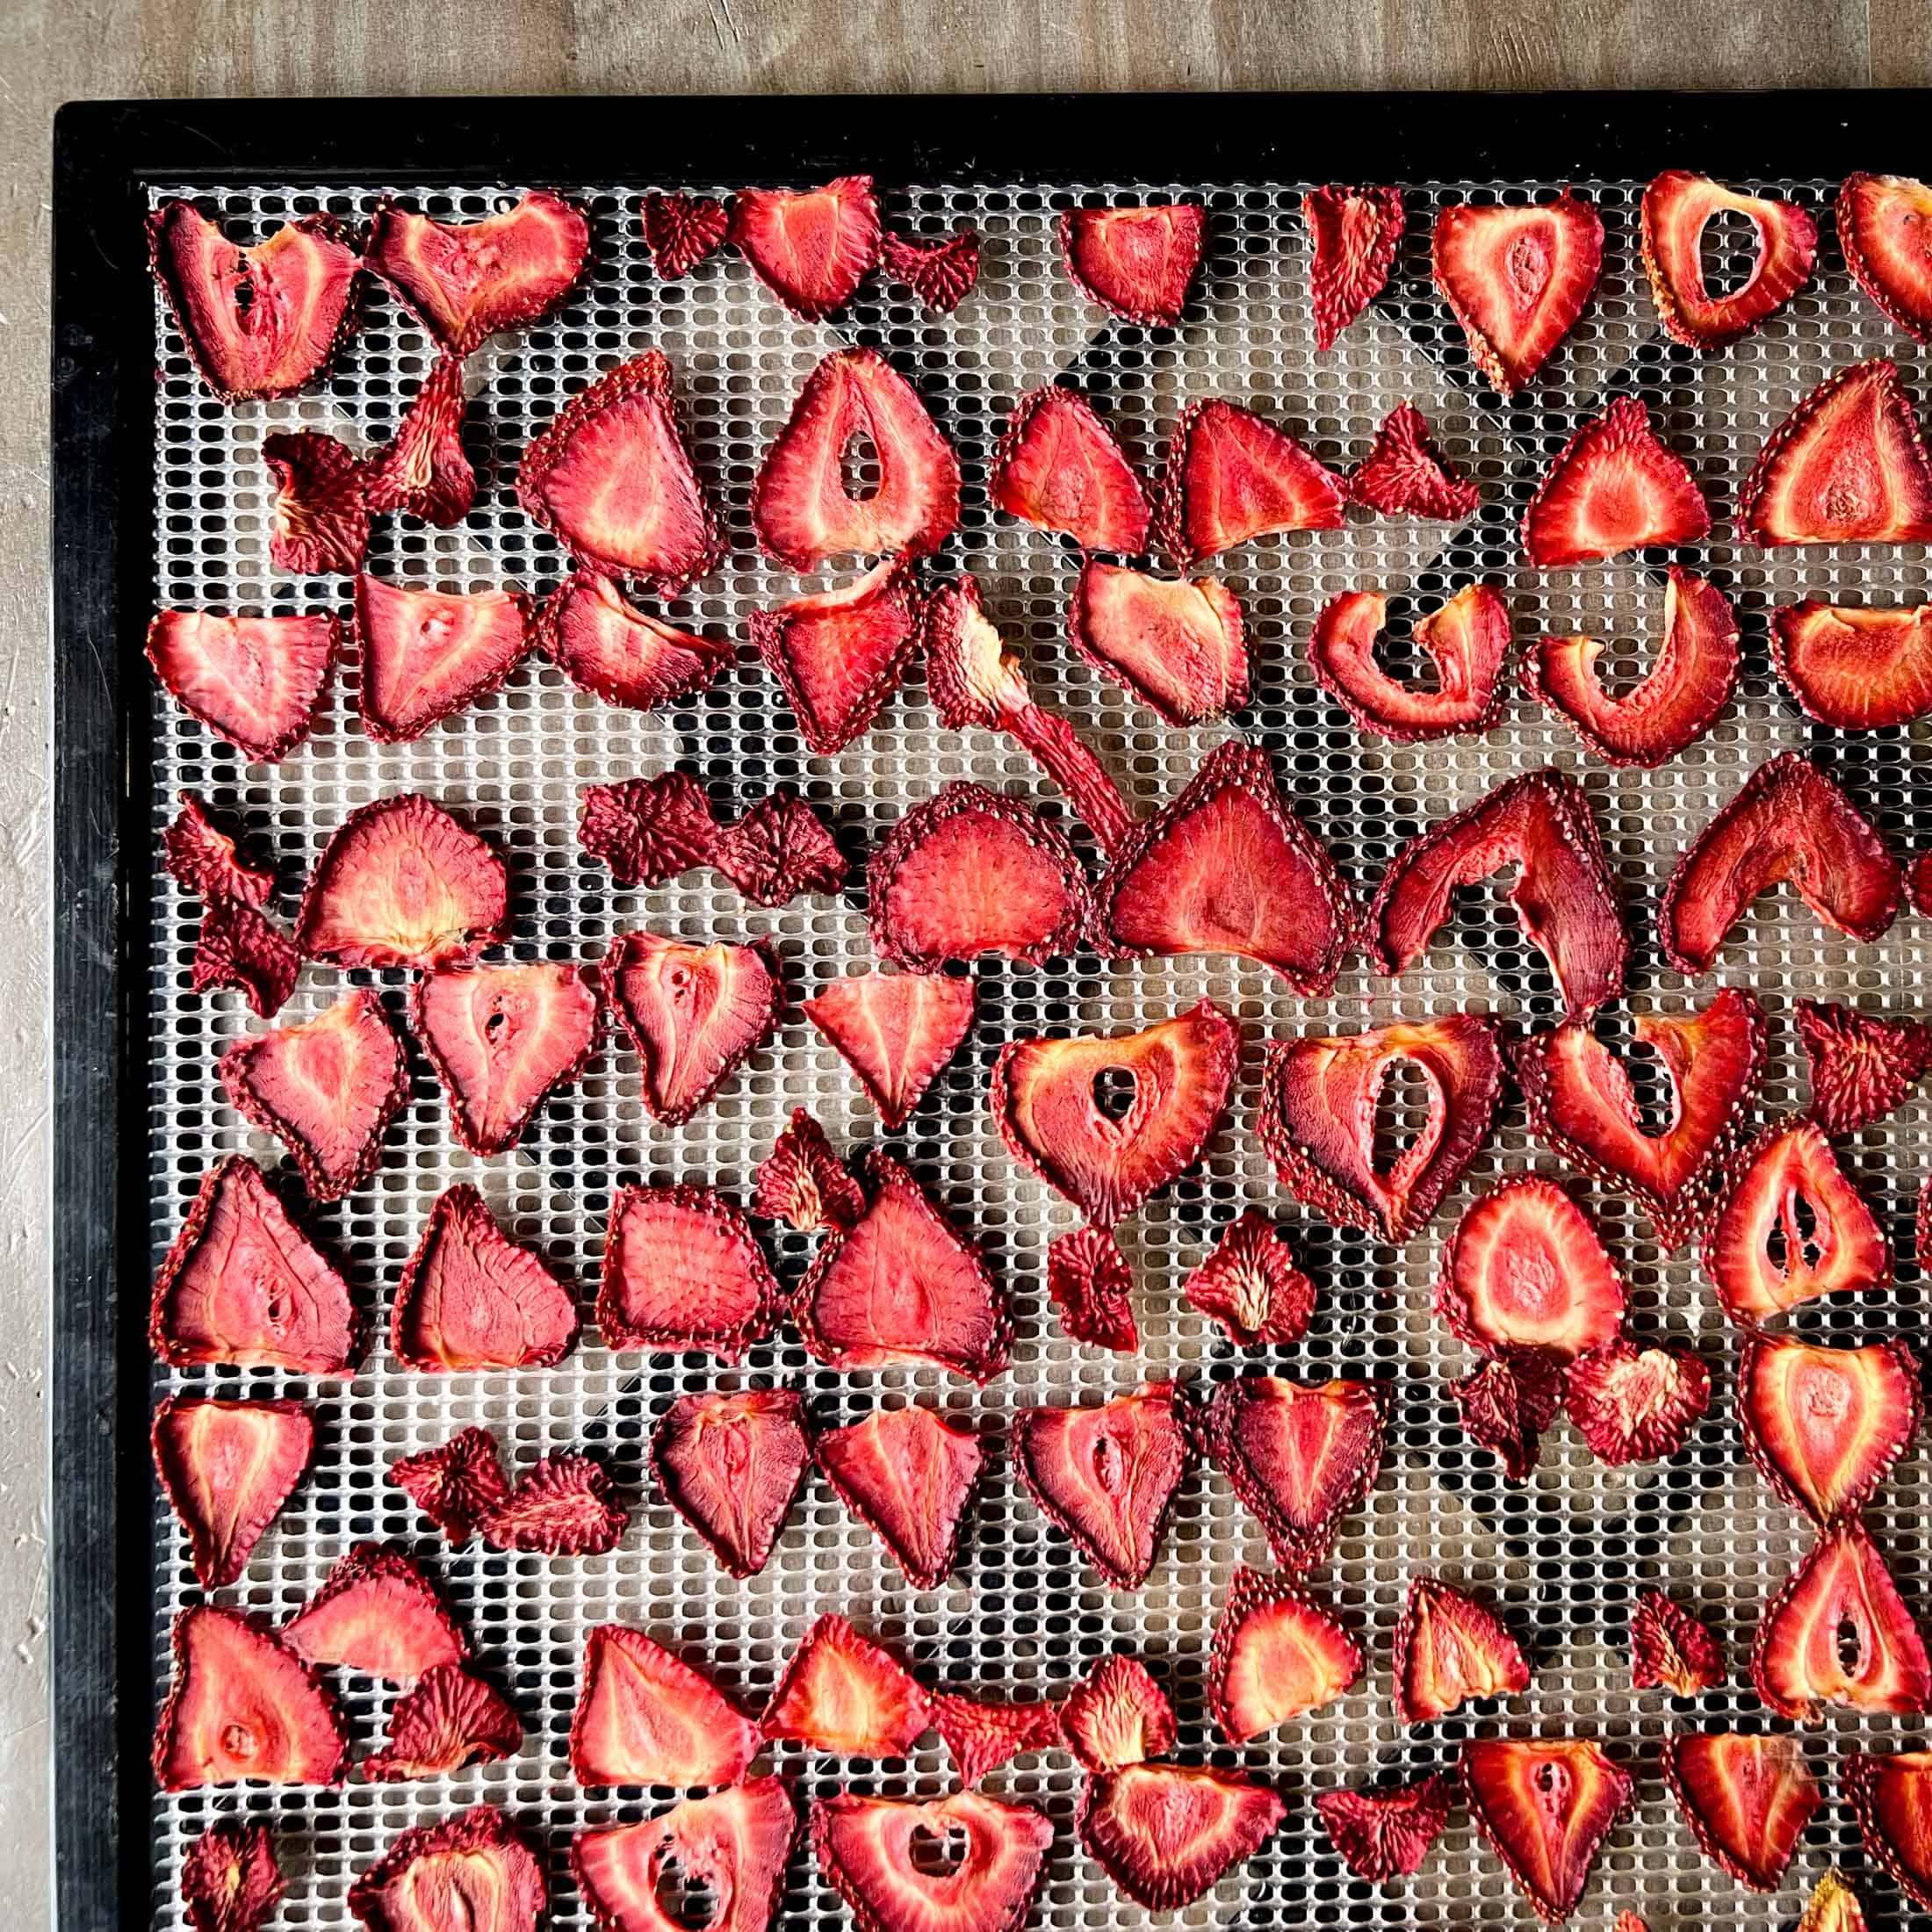 Fully dehydrated strawberries on a dehydrator tray.